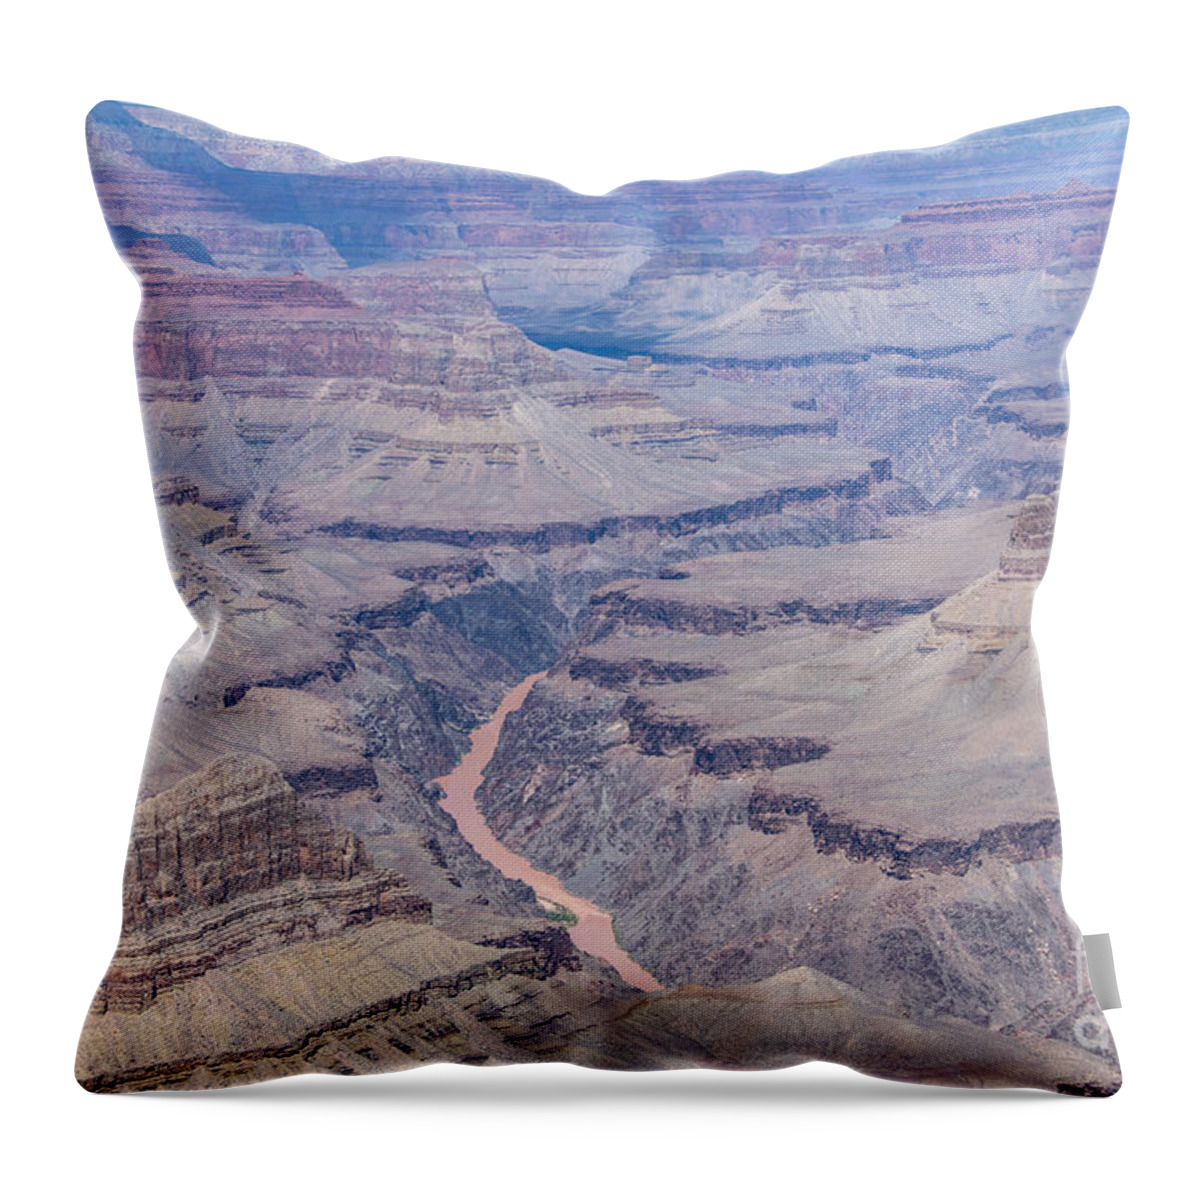 The Grand Canyon And Colorado River Throw Pillow featuring the digital art The Grand Canyon and Colorado River by Tammy Keyes